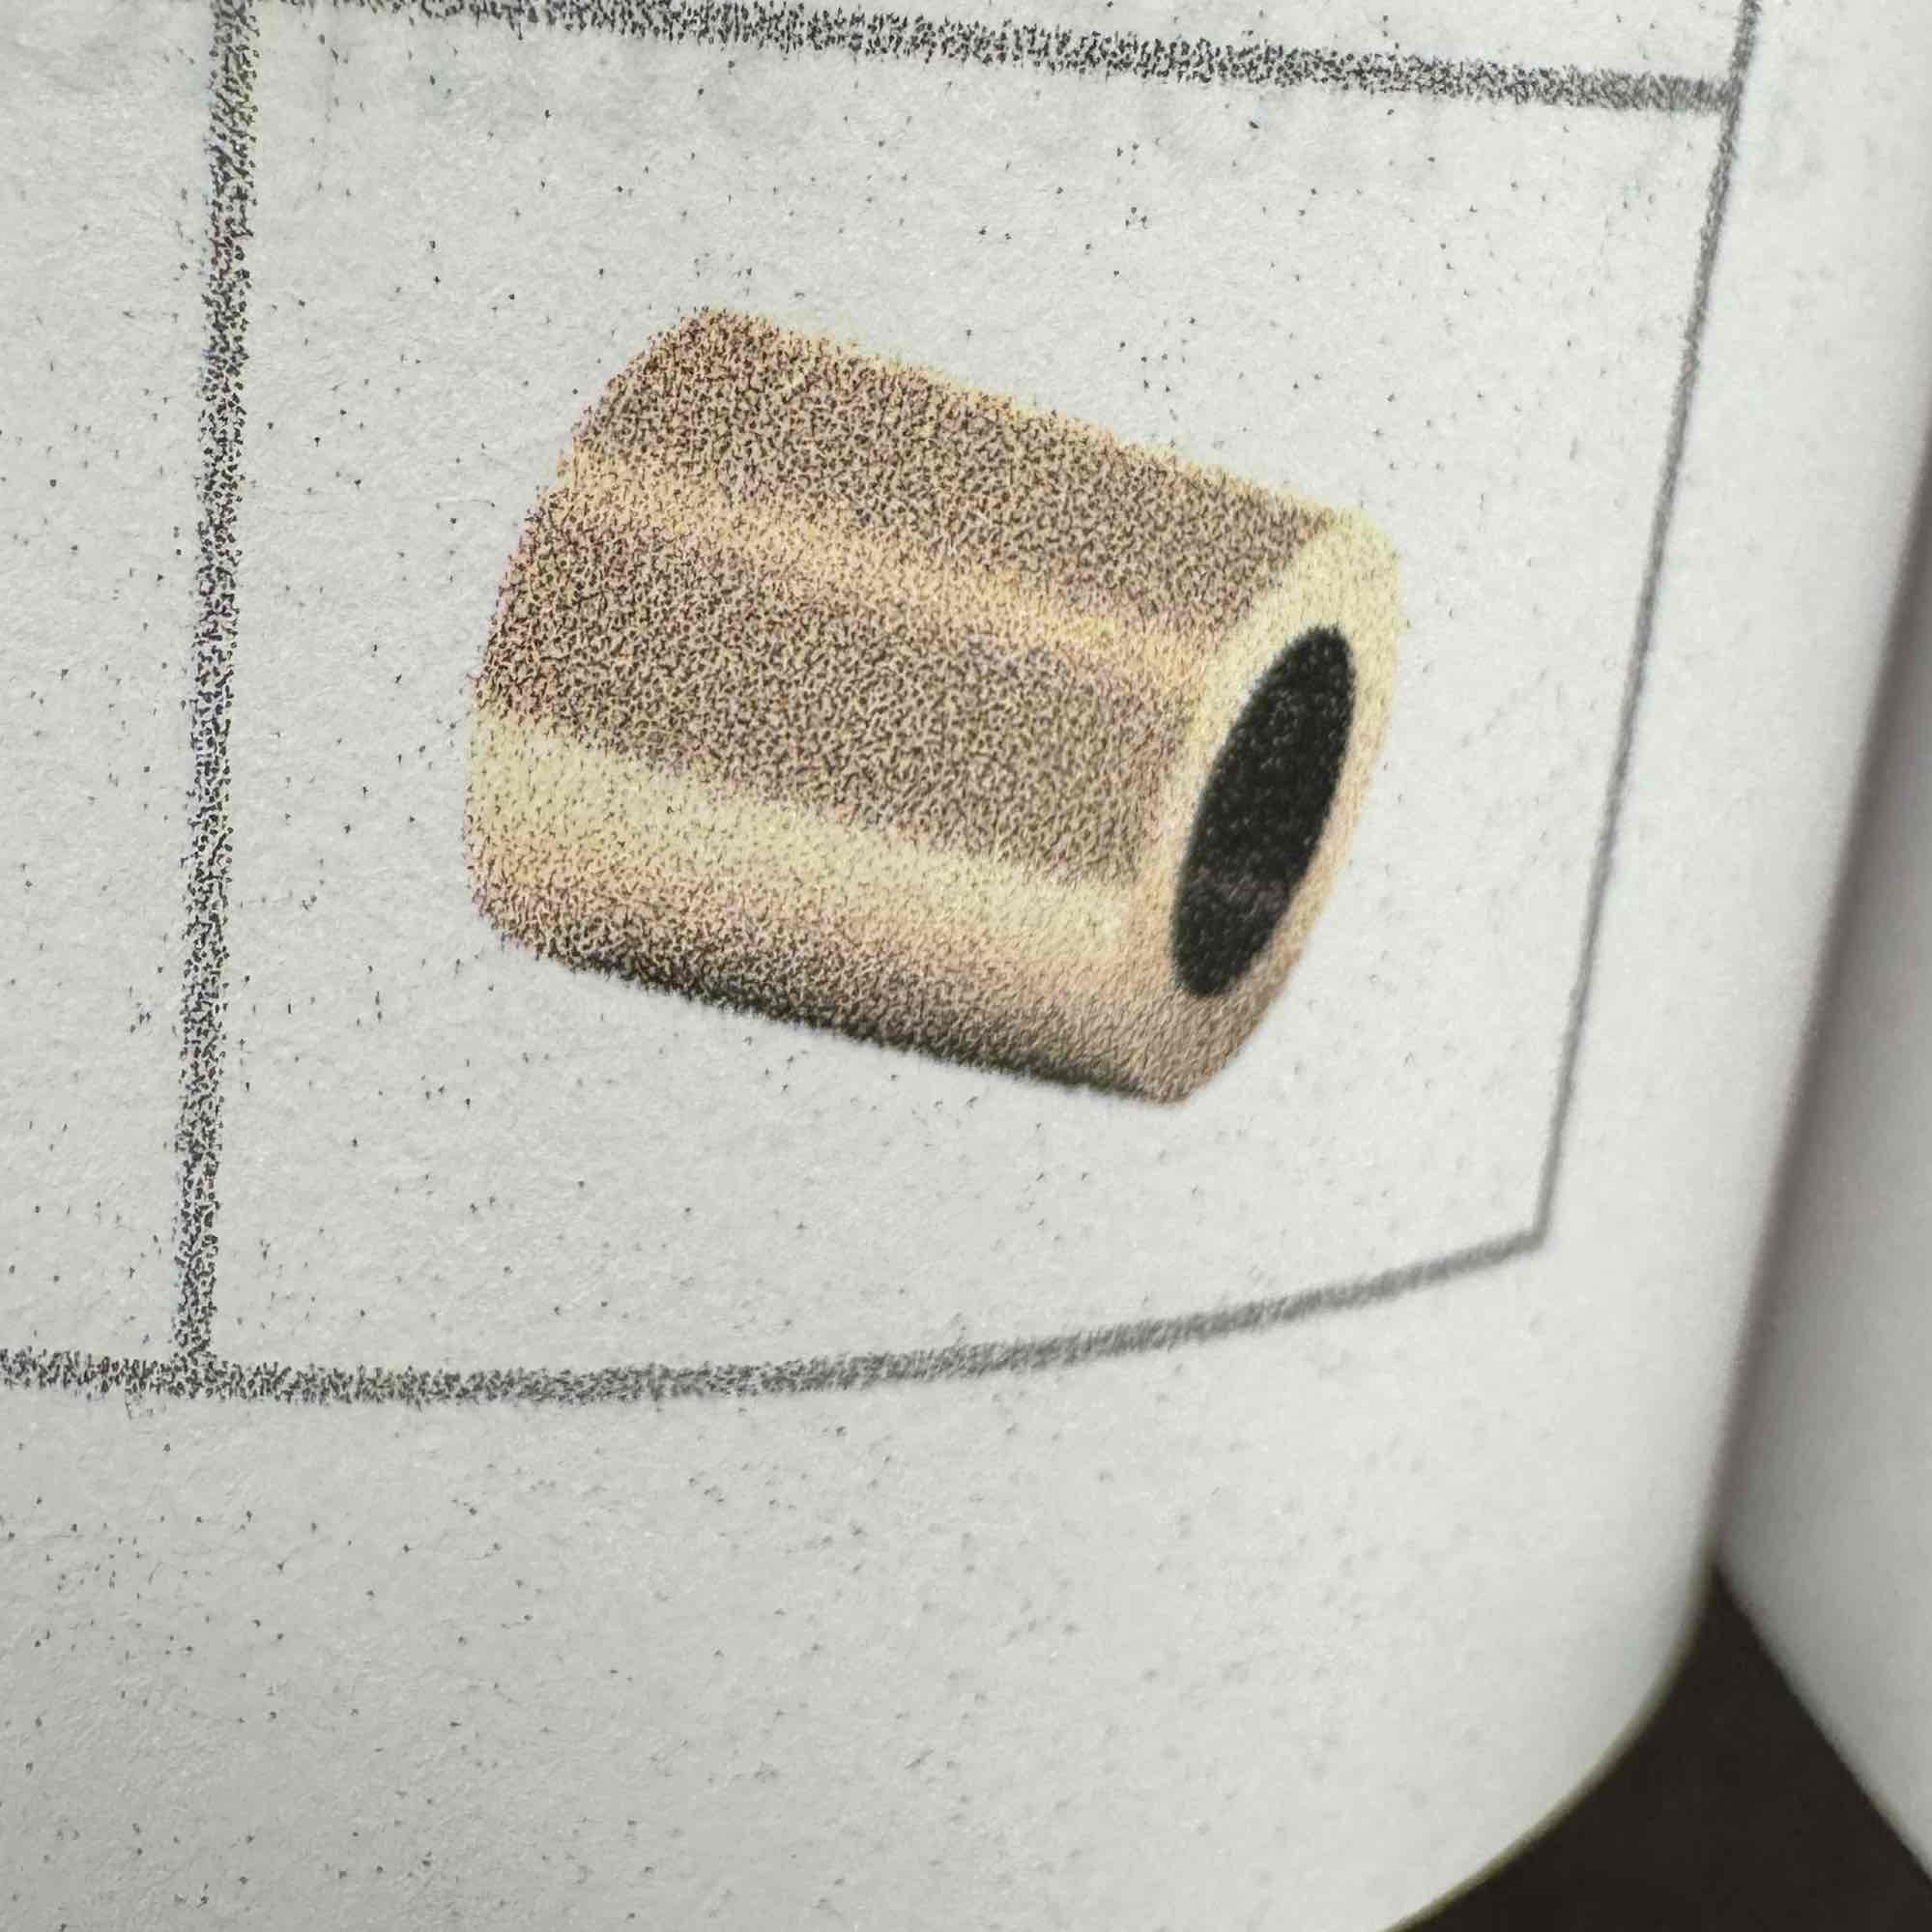 <p>A hollow cylinder used as a protective sleeve or guide</p>